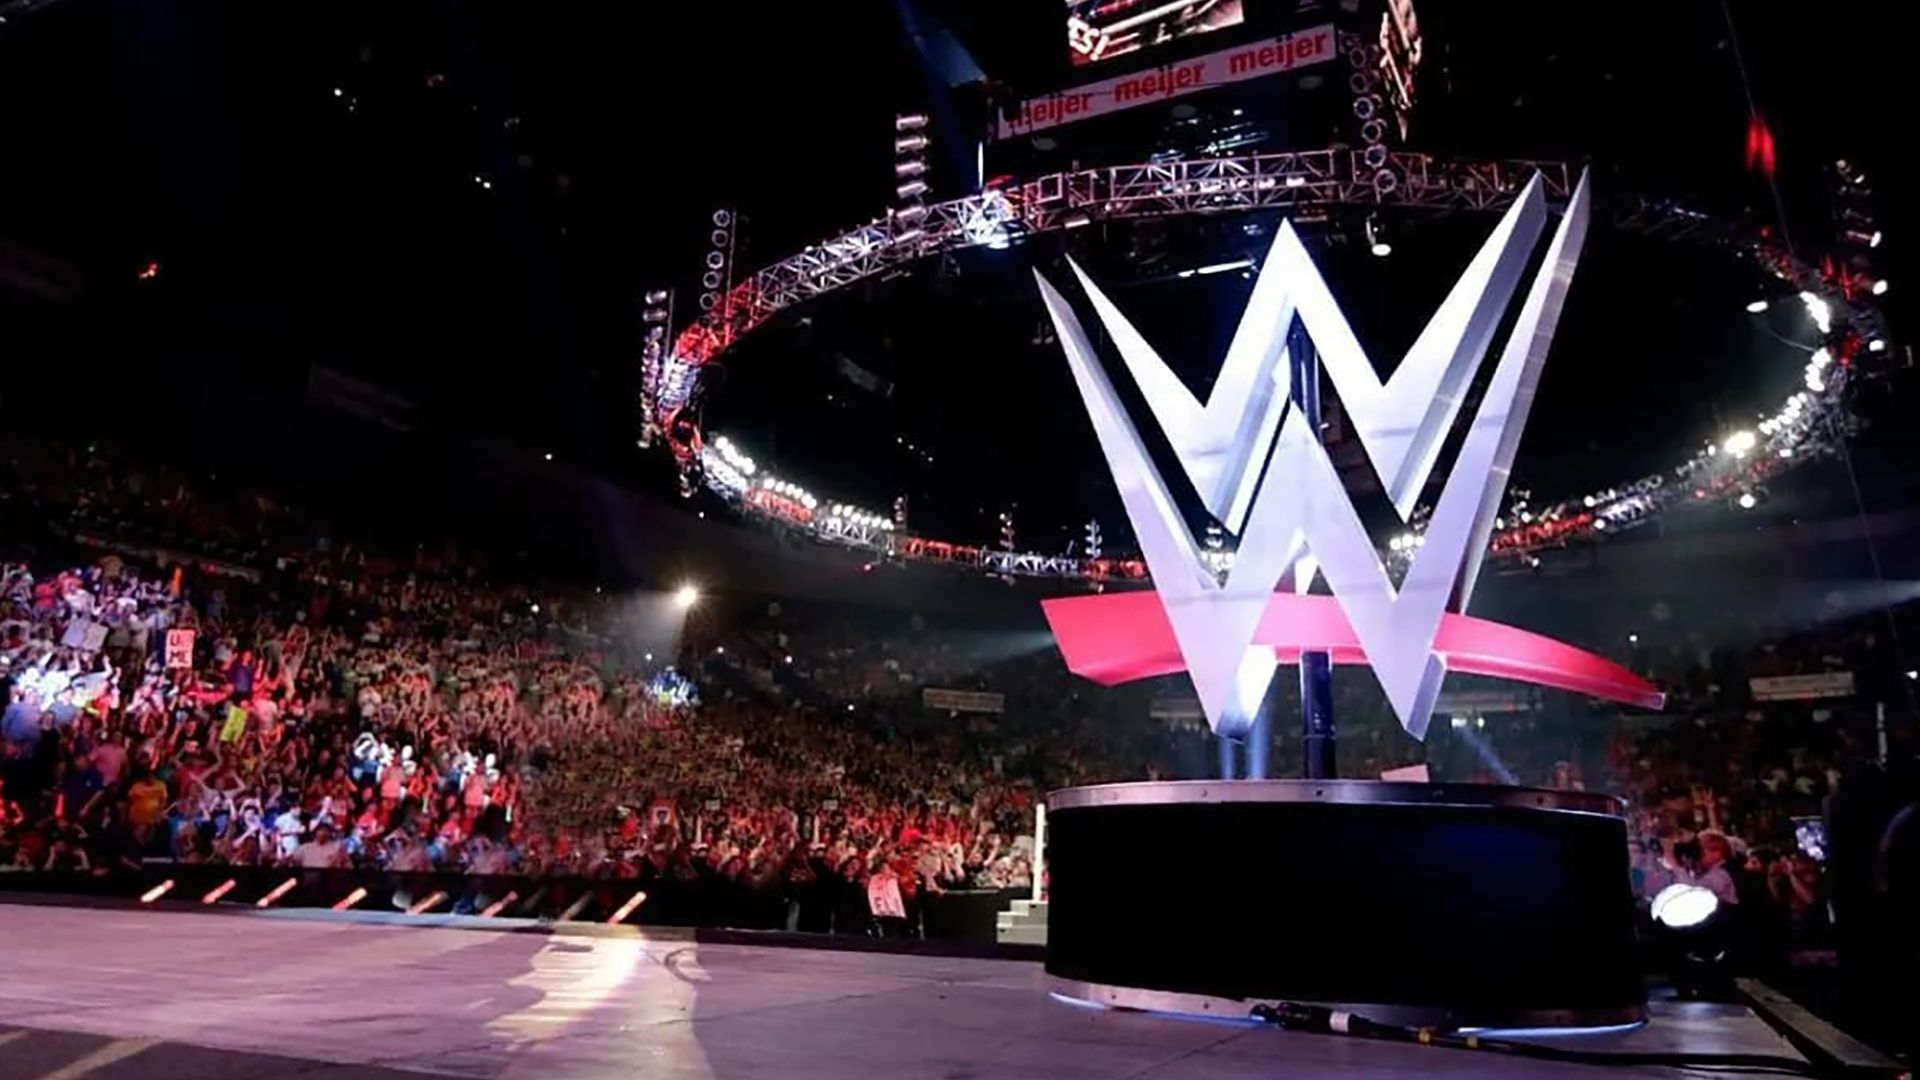 The WWE logos and stage/set on display